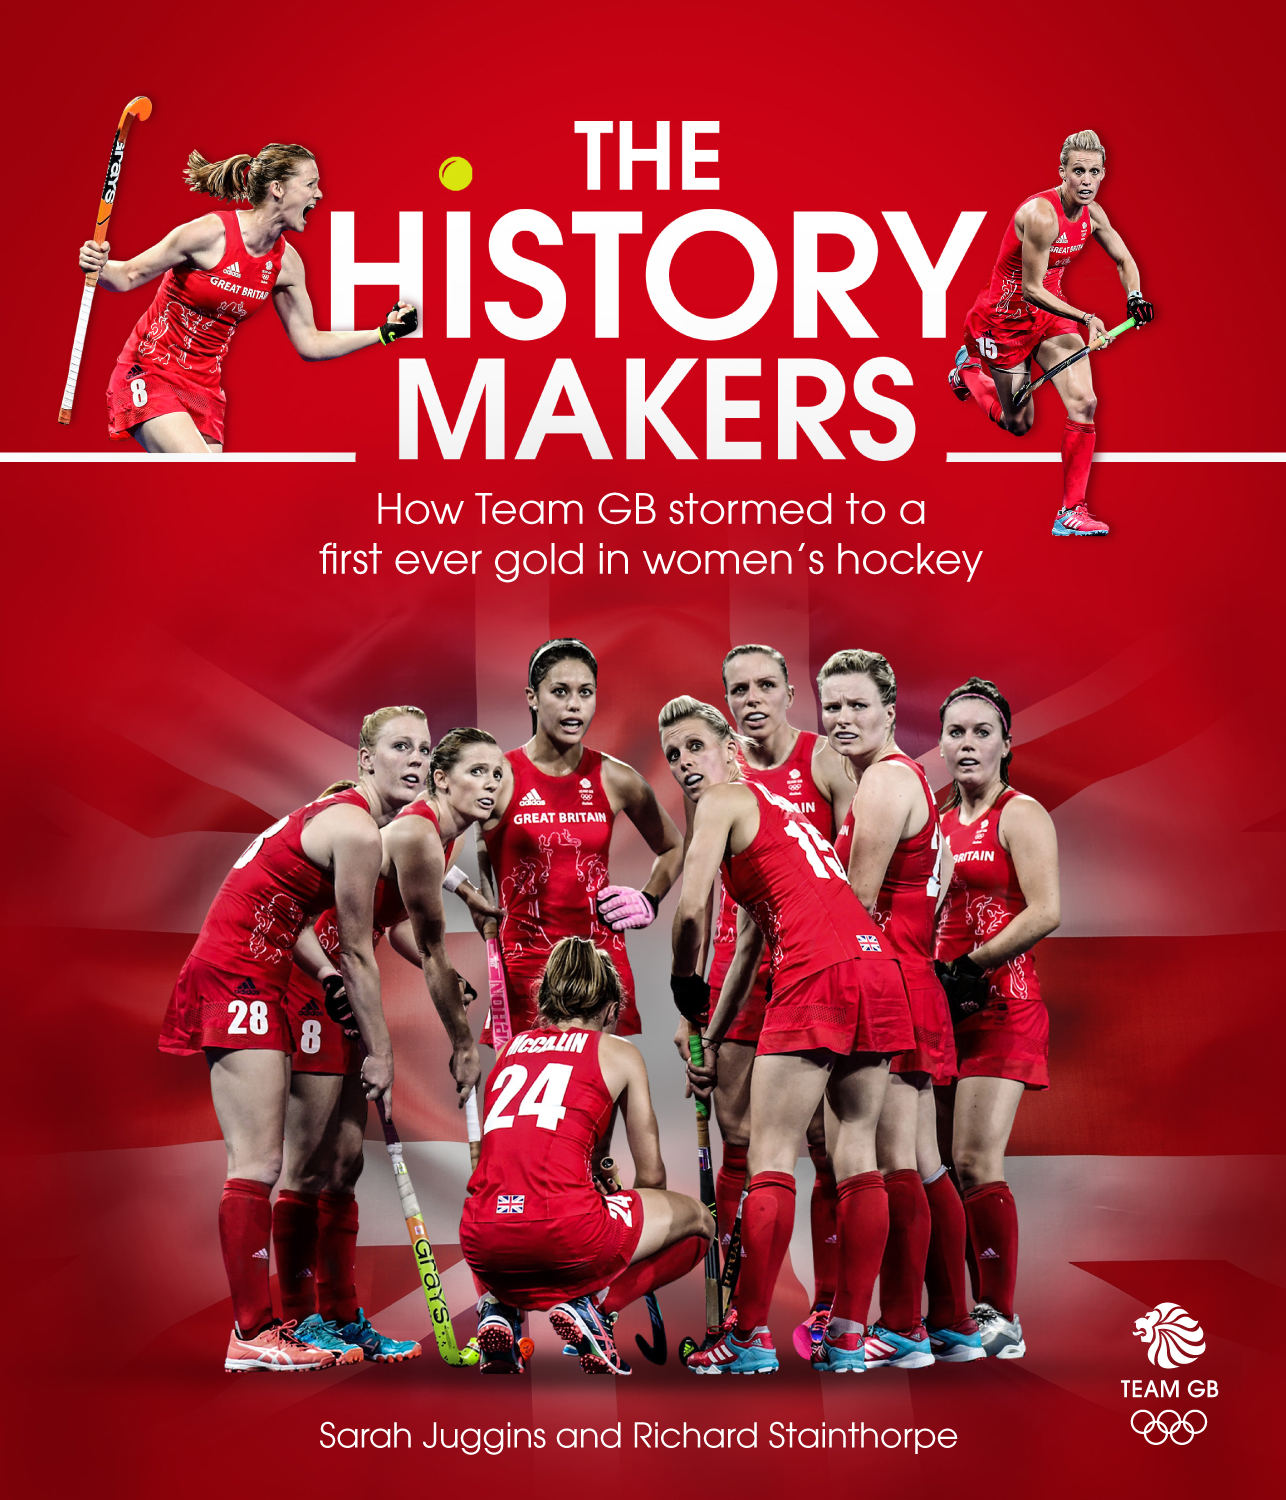 The History Makers